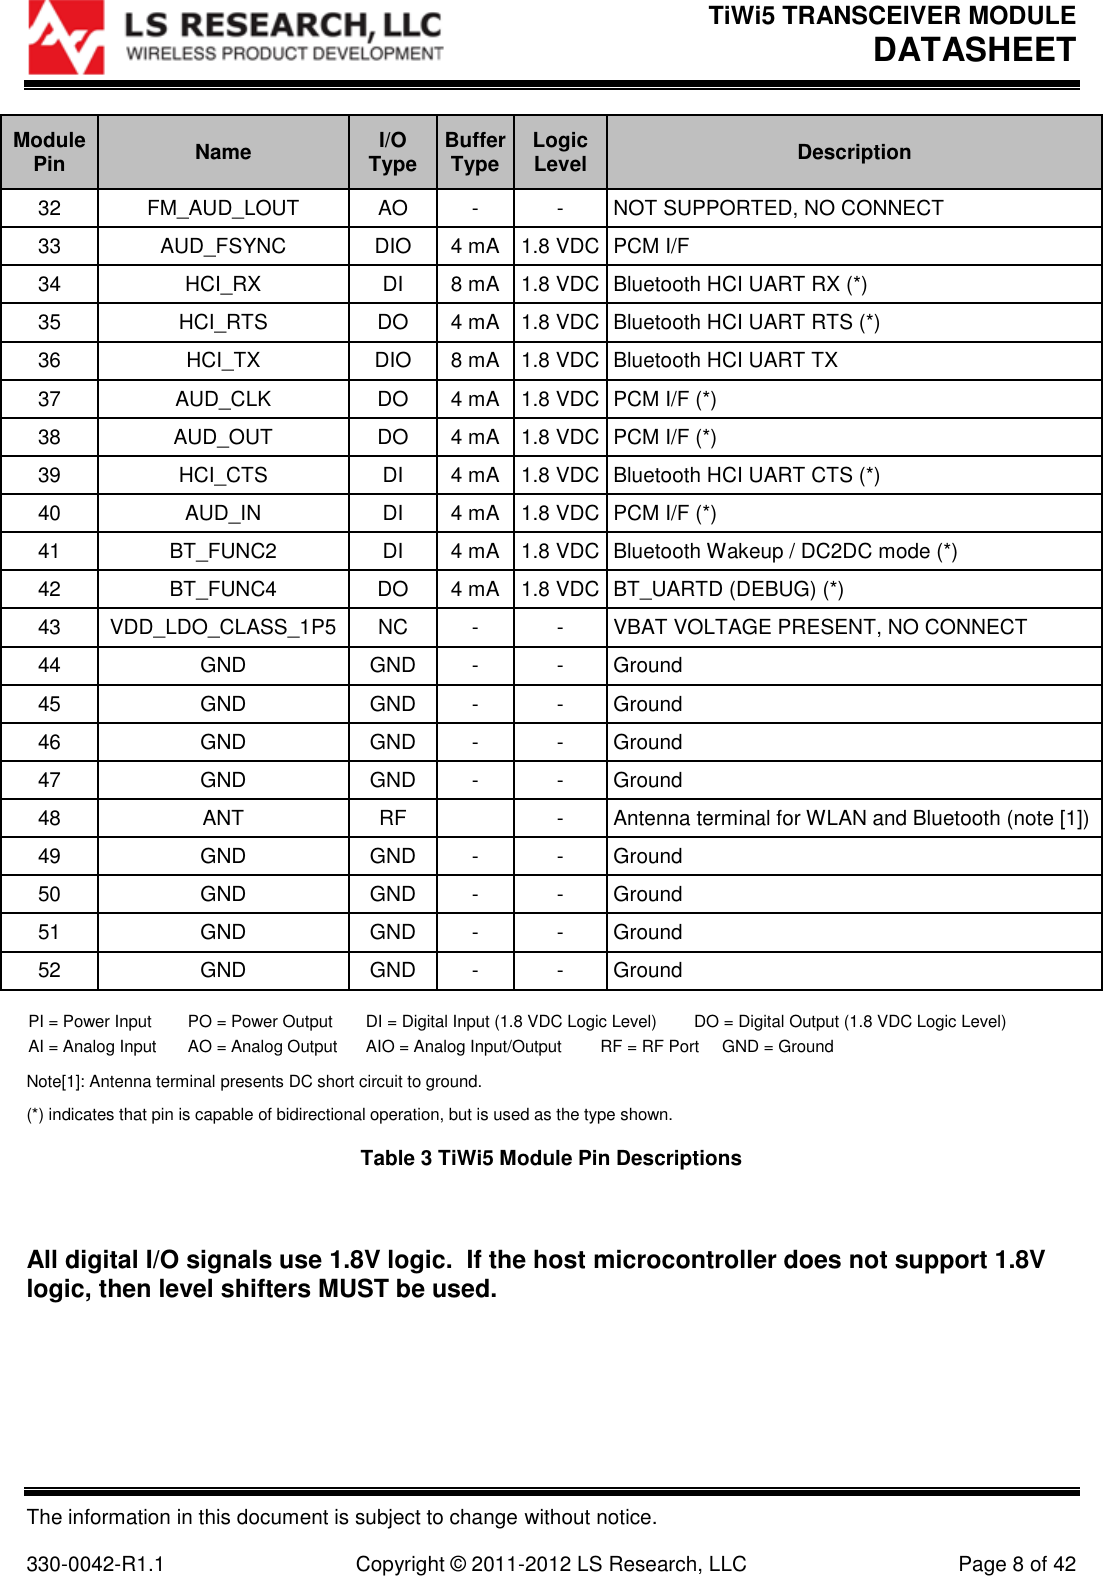 TiWi5 TRANSCEIVER MODULE DATASHEET  The information in this document is subject to change without notice.  330-0042-R1.1    Copyright © 2011-2012 LS Research, LLC  Page 8 of 42 Module Pin Name I/O Type Buffer Type Logic Level Description 32 FM_AUD_LOUT AO - - NOT SUPPORTED, NO CONNECT 33 AUD_FSYNC DIO 4 mA 1.8 VDC PCM I/F 34 HCI_RX DI 8 mA 1.8 VDC Bluetooth HCI UART RX (*) 35 HCI_RTS DO 4 mA 1.8 VDC Bluetooth HCI UART RTS (*) 36 HCI_TX DIO 8 mA 1.8 VDC Bluetooth HCI UART TX 37 AUD_CLK DO 4 mA 1.8 VDC PCM I/F (*) 38 AUD_OUT DO 4 mA 1.8 VDC PCM I/F (*) 39 HCI_CTS DI 4 mA 1.8 VDC Bluetooth HCI UART CTS (*) 40 AUD_IN DI 4 mA 1.8 VDC PCM I/F (*) 41 BT_FUNC2 DI 4 mA 1.8 VDC Bluetooth Wakeup / DC2DC mode (*) 42 BT_FUNC4 DO 4 mA 1.8 VDC BT_UARTD (DEBUG) (*) 43 VDD_LDO_CLASS_1P5 NC - - VBAT VOLTAGE PRESENT, NO CONNECT 44 GND GND - - Ground 45 GND GND - - Ground 46 GND GND - - Ground 47 GND GND - - Ground 48 ANT RF  - Antenna terminal for WLAN and Bluetooth (note [1]) 49 GND GND - - Ground 50 GND GND - - Ground 51 GND GND - - Ground 52 GND GND - - Ground  PI = Power Input PO = Power Output DI = Digital Input (1.8 VDC Logic Level) DO = Digital Output (1.8 VDC Logic Level)  AI = Analog Input AO = Analog Output AIO = Analog Input/Output RF = RF Port GND = Ground   Note[1]: Antenna terminal presents DC short circuit to ground.  (*) indicates that pin is capable of bidirectional operation, but is used as the type shown.  Table 3 TiWi5 Module Pin Descriptions  All digital I/O signals use 1.8V logic.  If the host microcontroller does not support 1.8V logic, then level shifters MUST be used.   